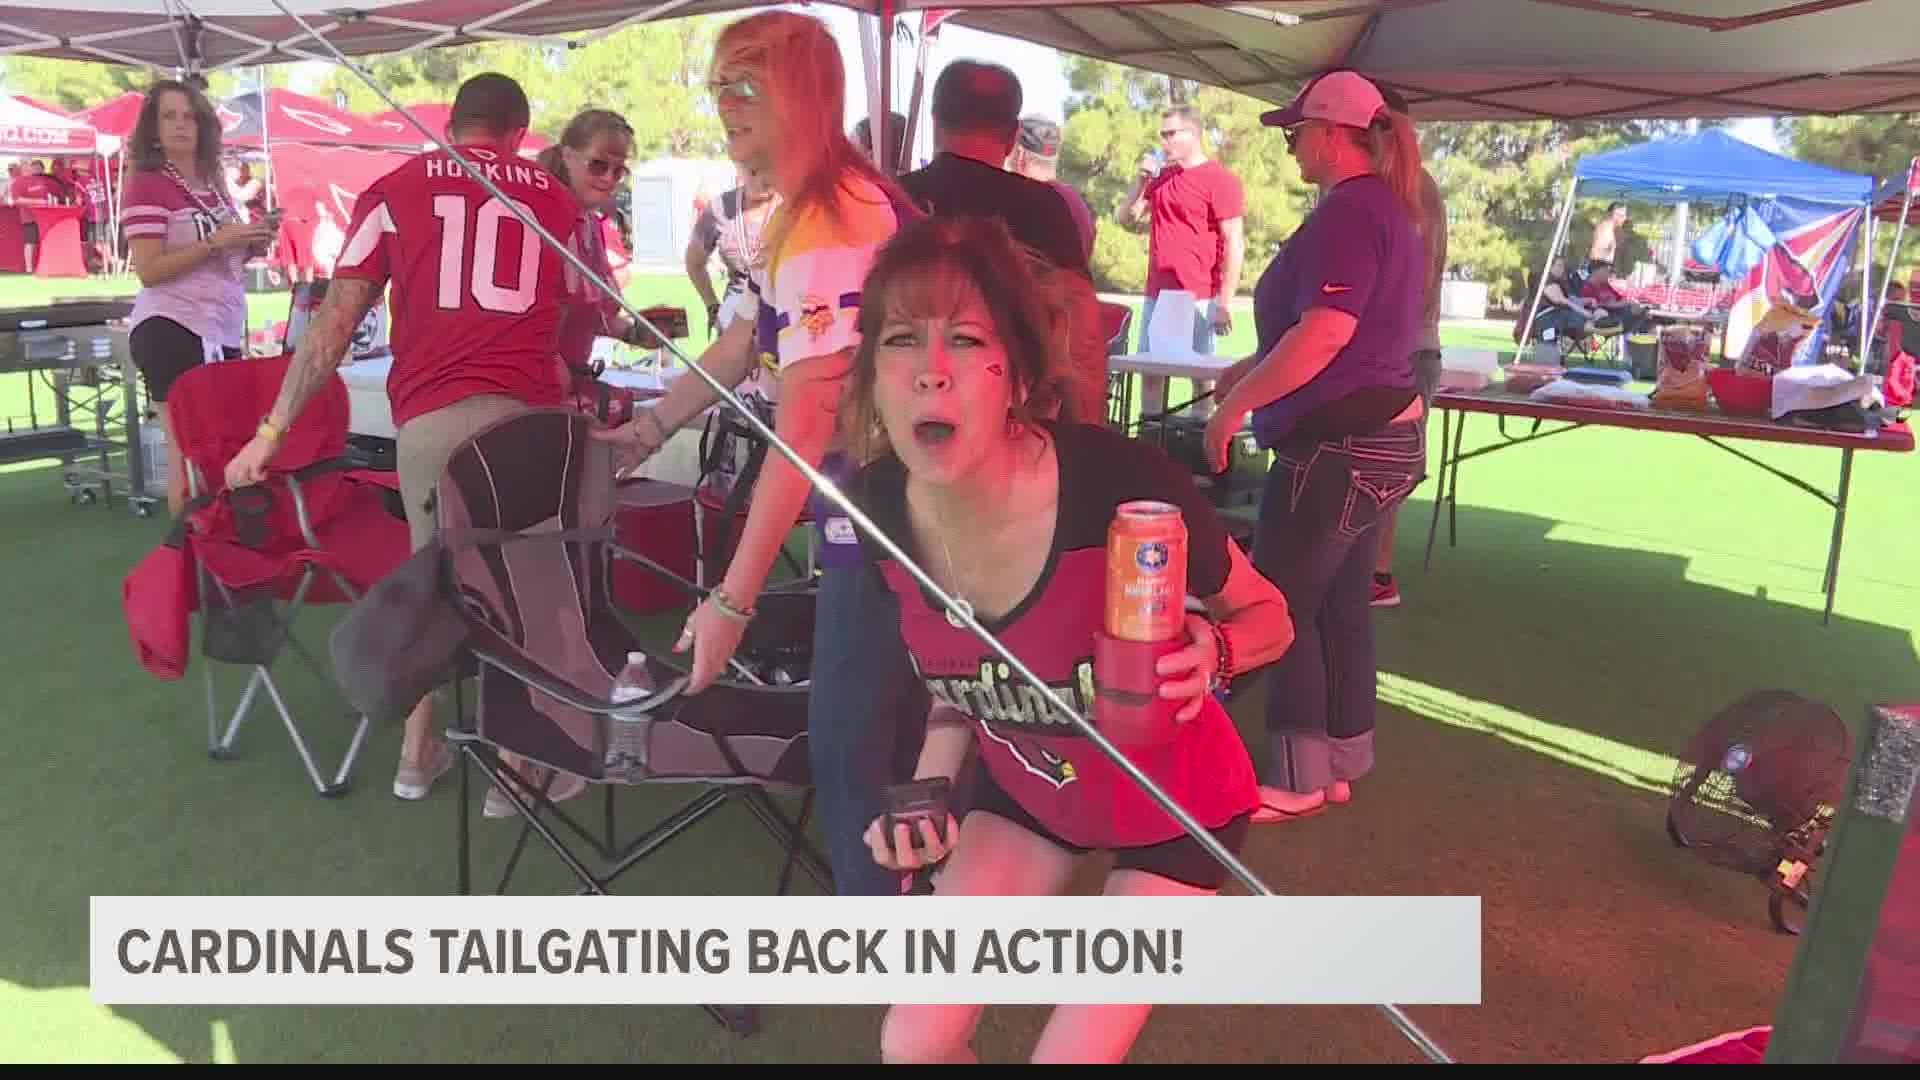 Arizona Cardinals fans got ready for the first home game of the season at State Farm Stadium. The team held off the Viking for a stunning victory.